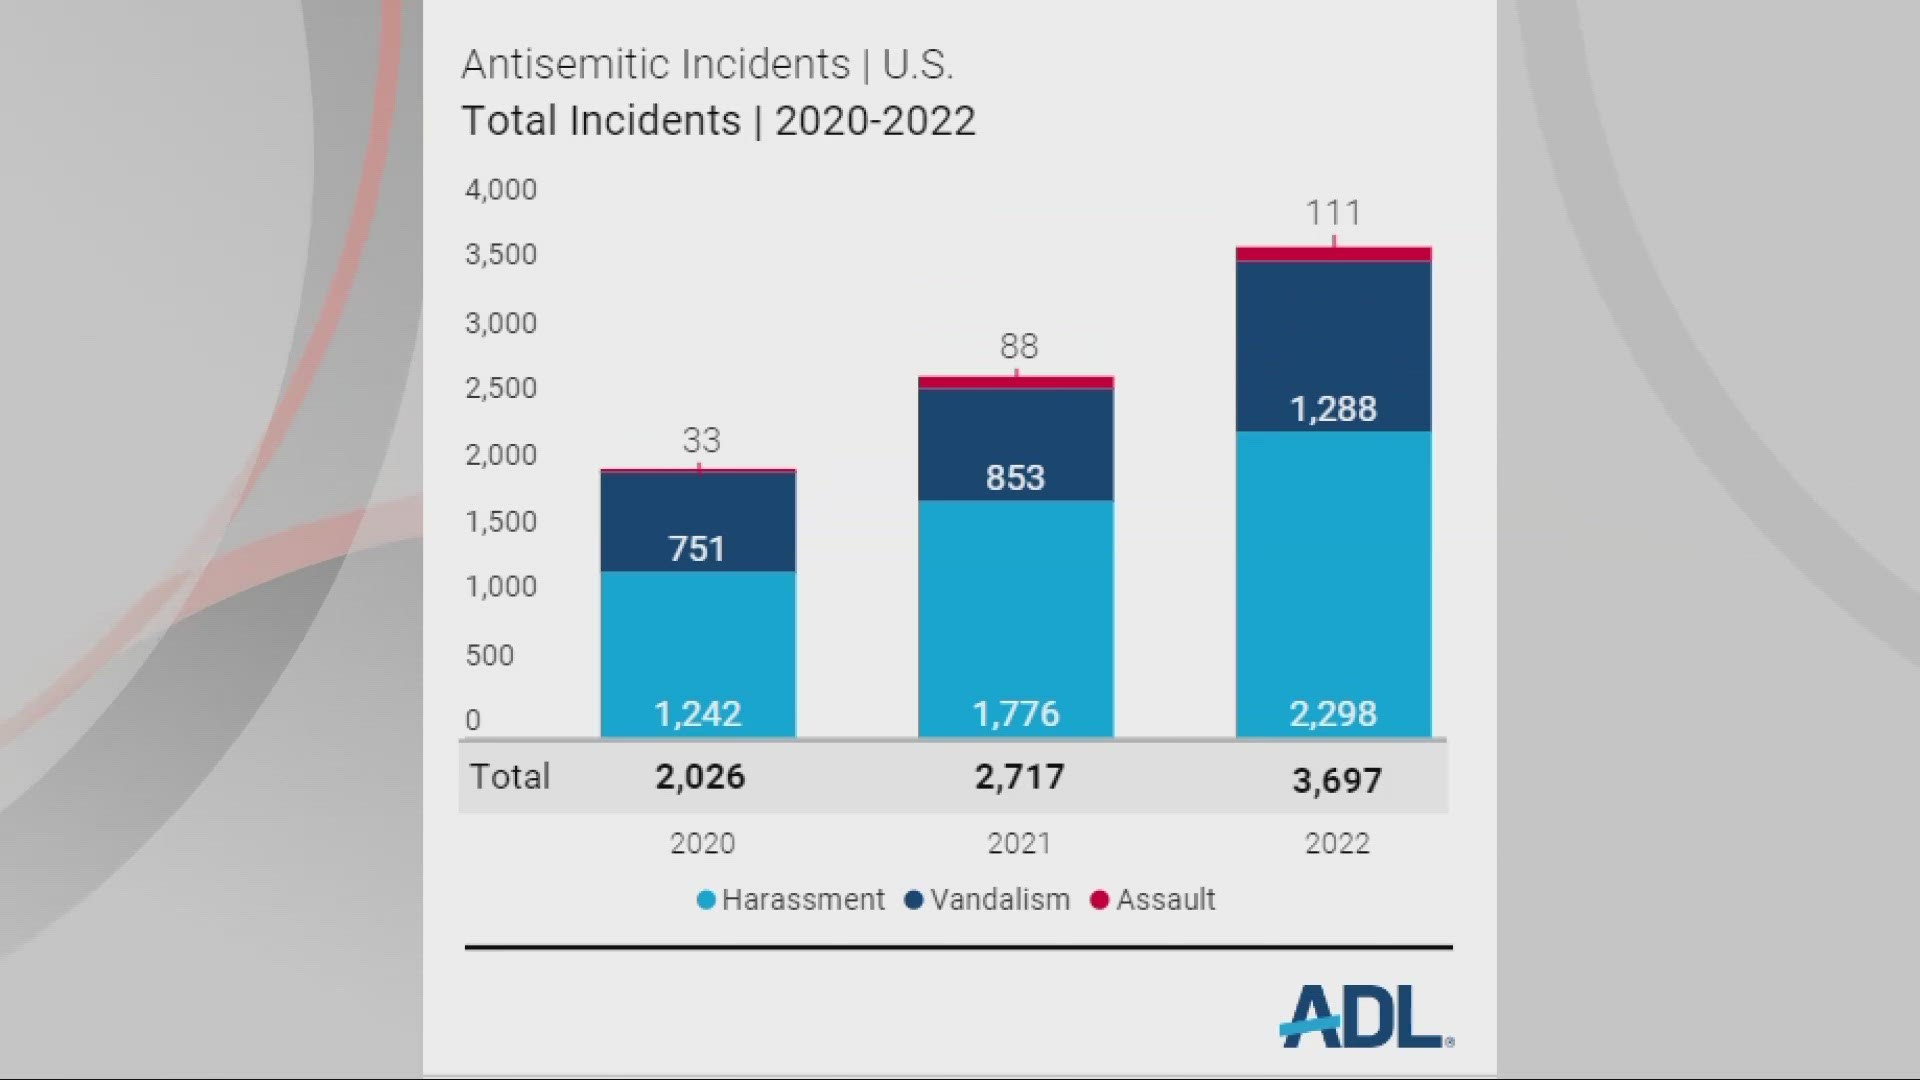 In the region that includes Ohio, Kentucky, West Virginia, and western Pennsylvania, the ADL reports a 37% increase in antisemitic crimes last year.